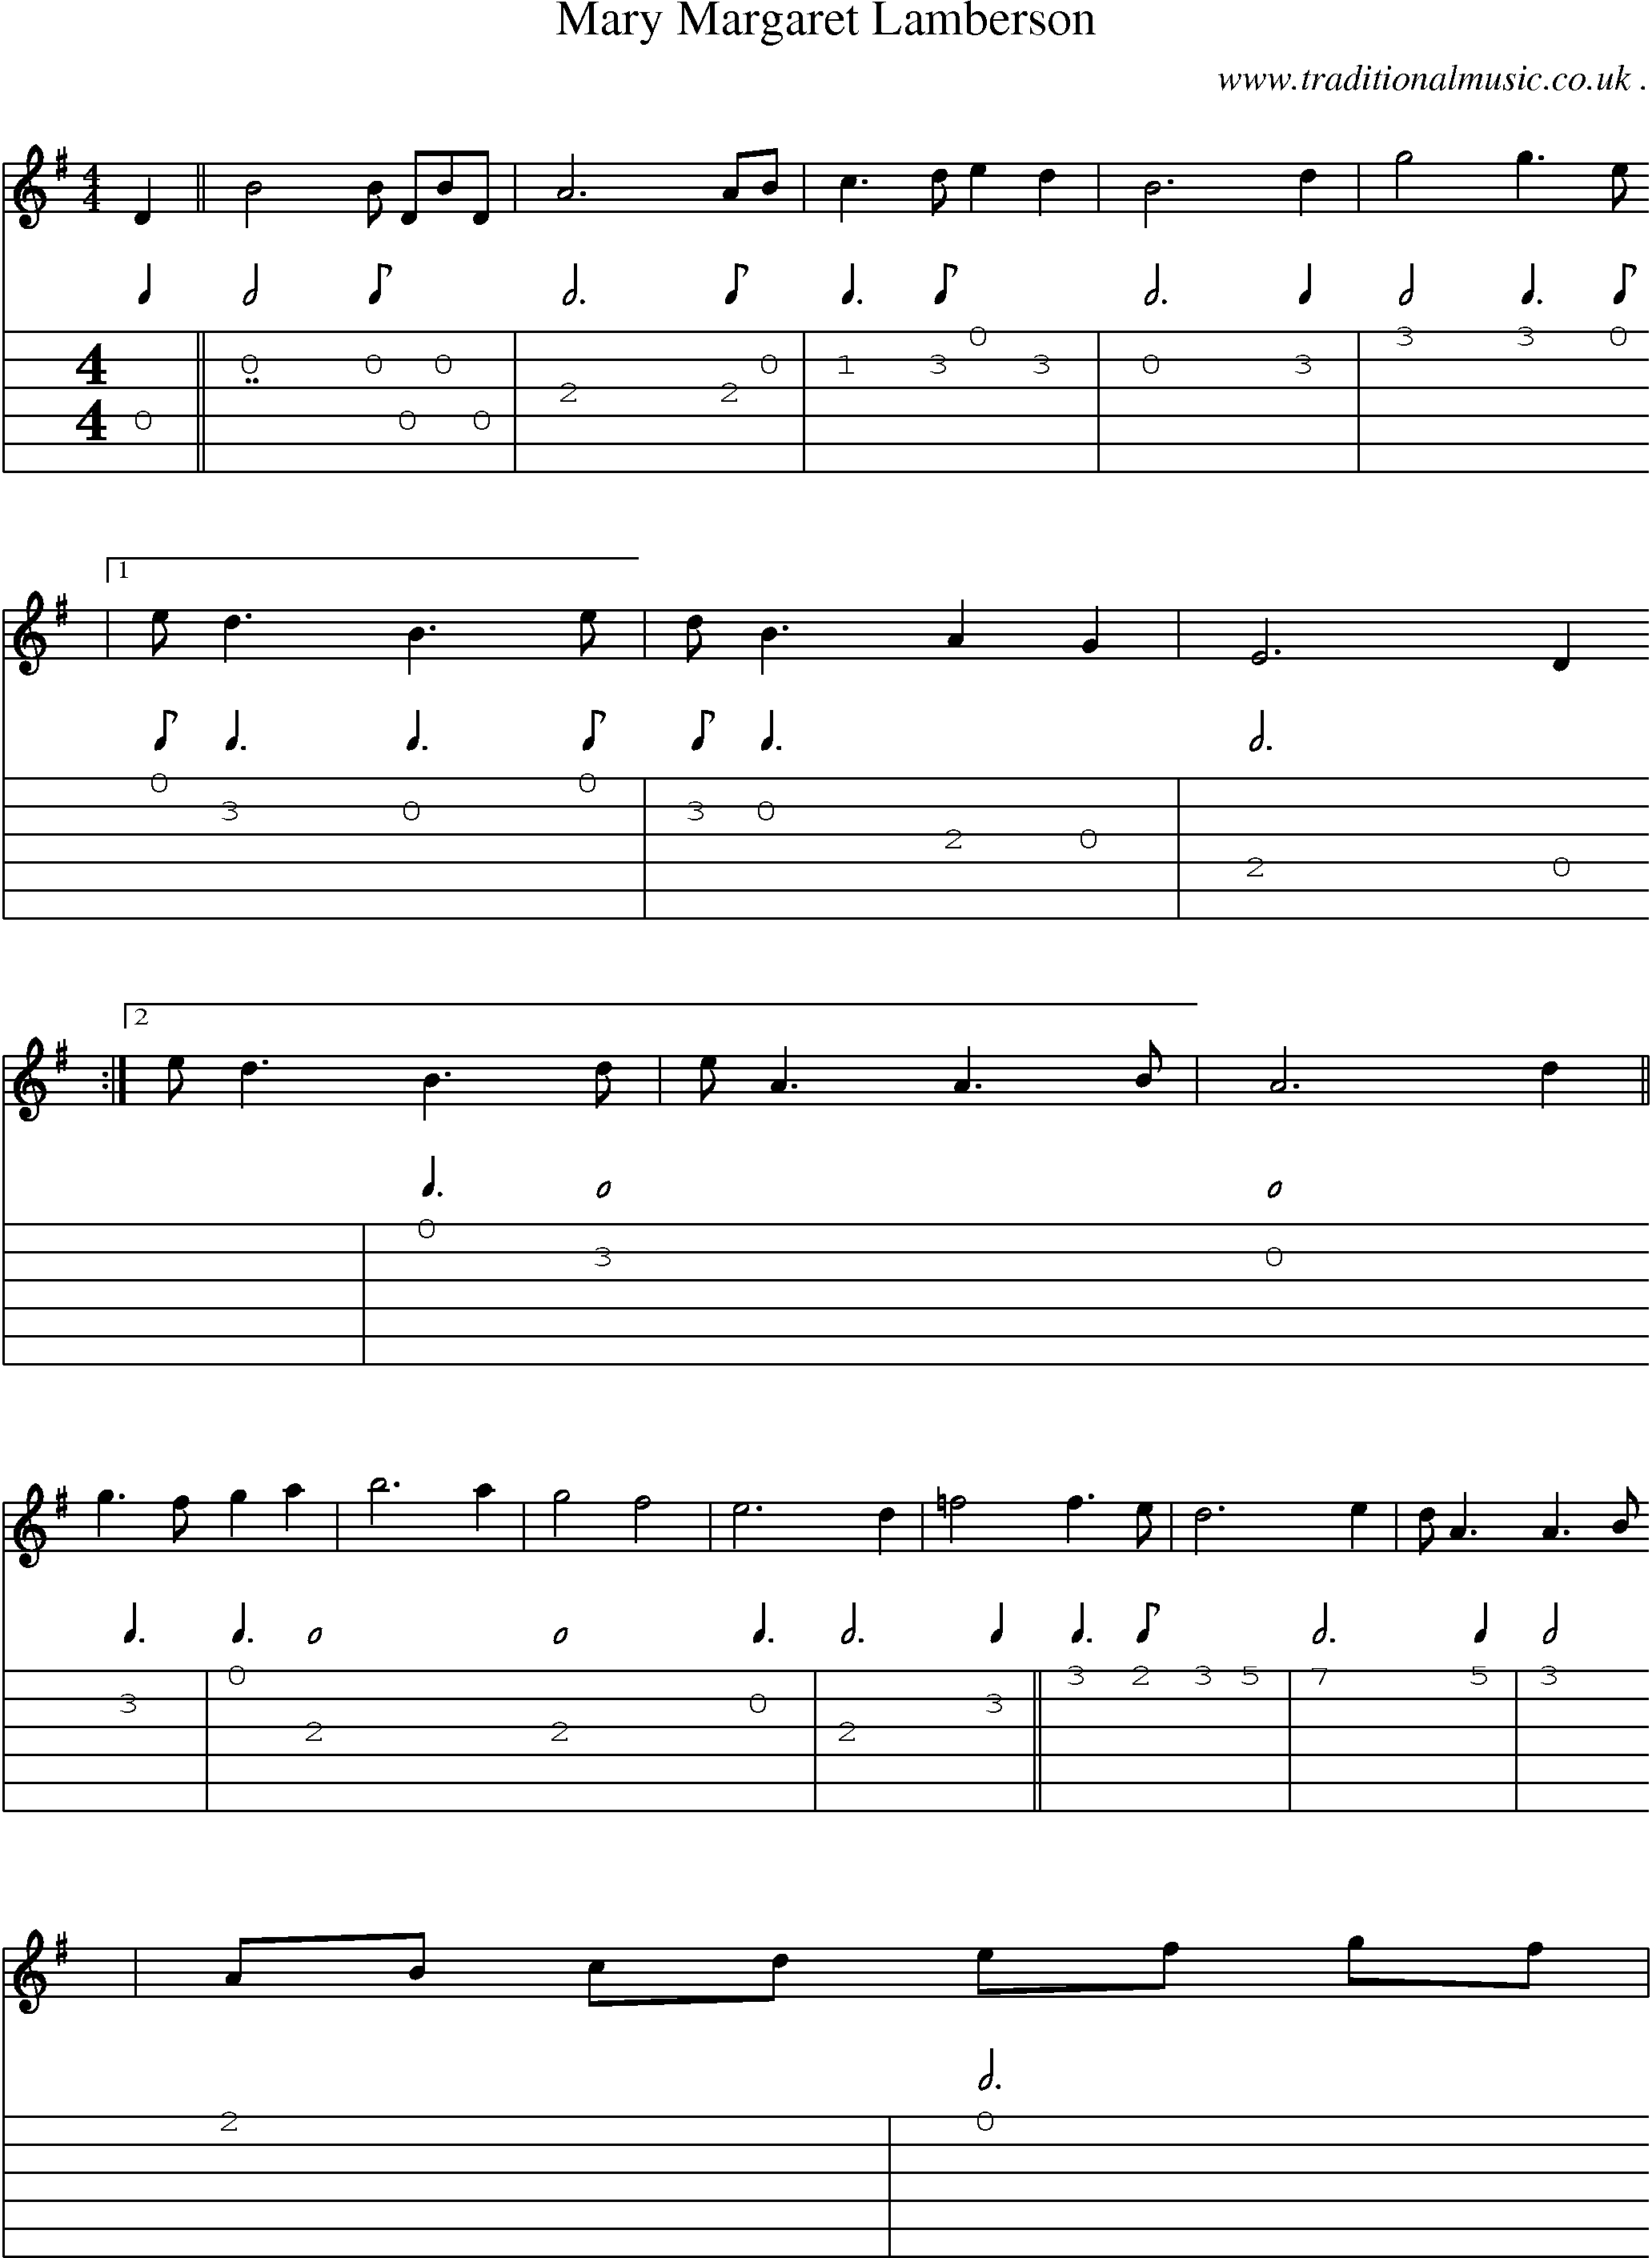 Sheet-Music and Guitar Tabs for Mary Margaret Lamberson